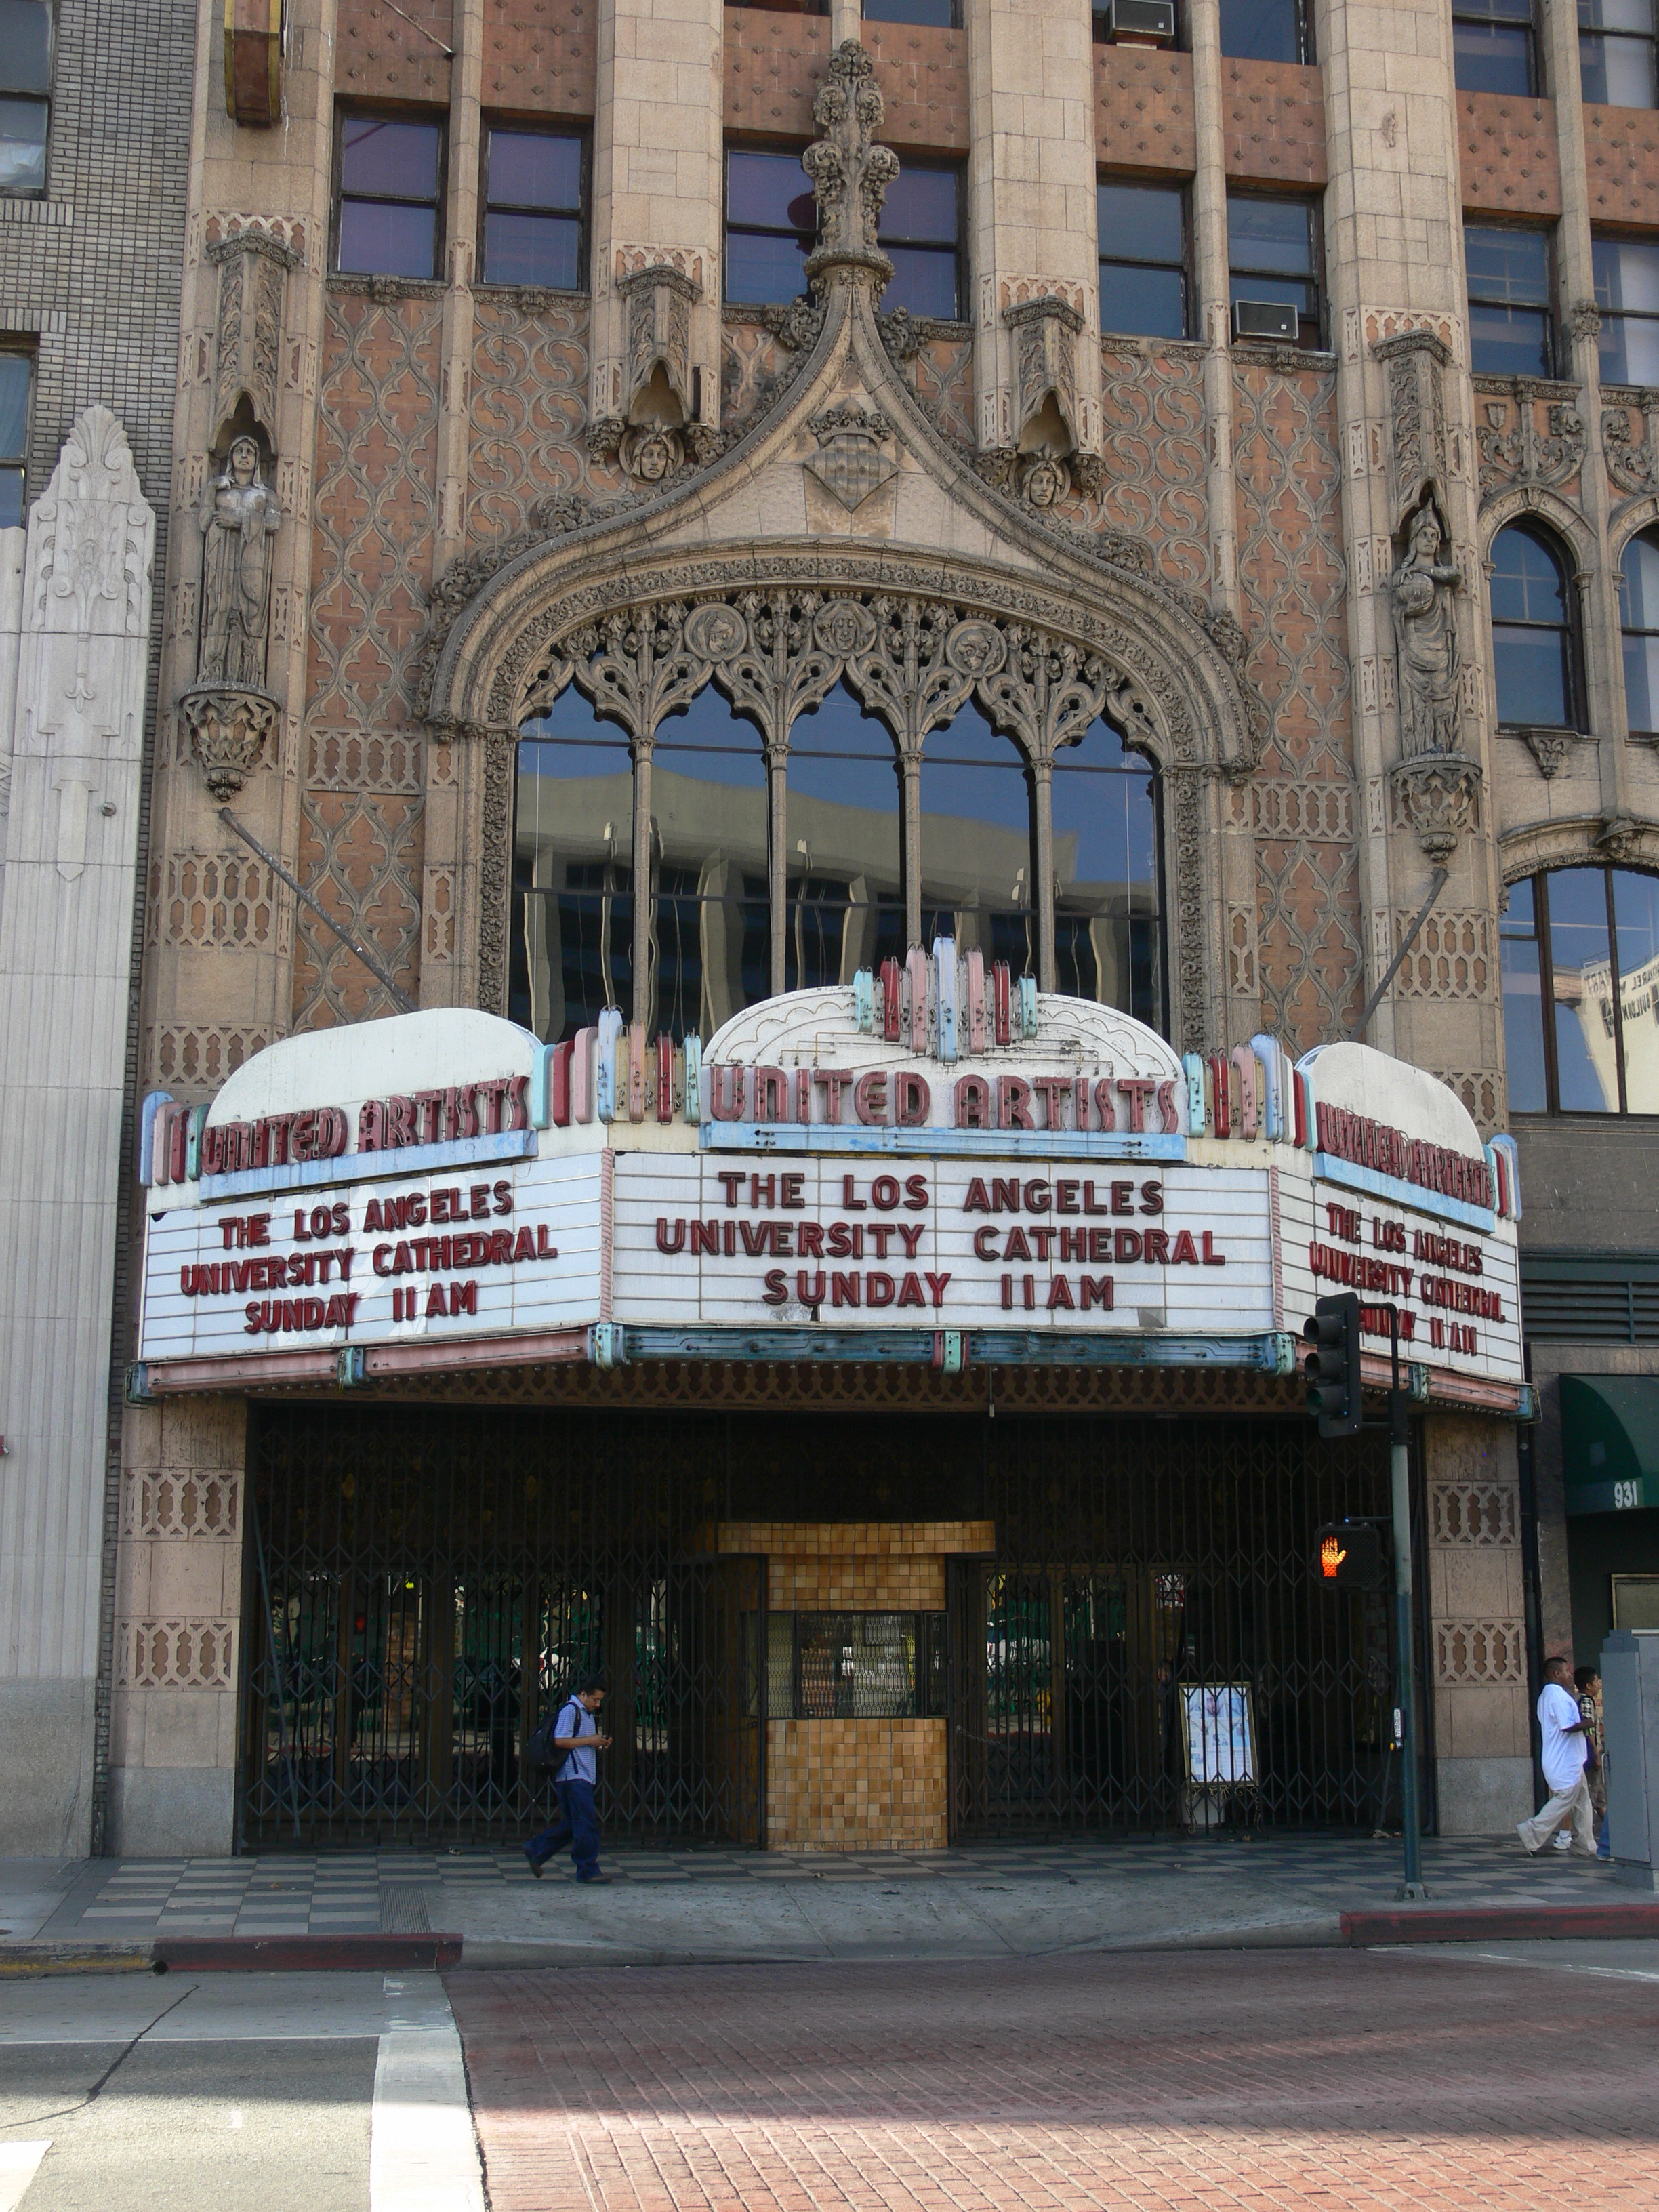 File:Los Angeles United Artists Theatre 2008 2.jpg - Wikimedia Commons